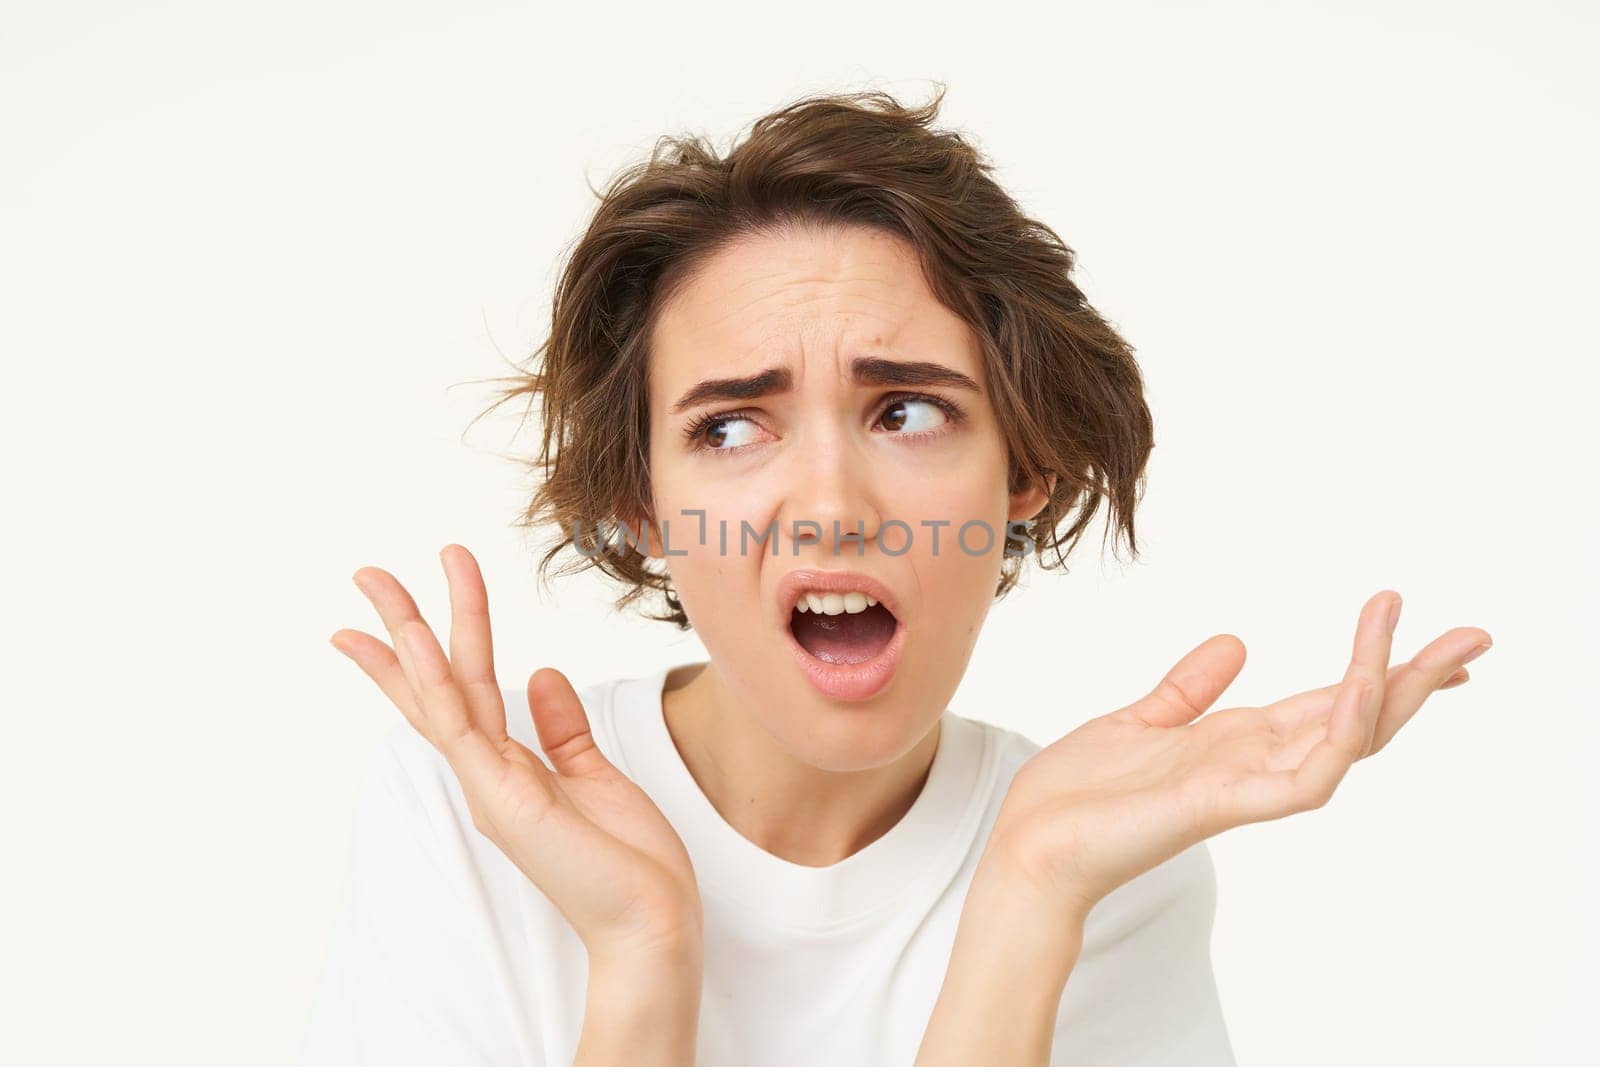 Portrait of confused, puzzled young woman, gasping, looking disappointed and frustrated, shrugging shoulders, posing over white background.